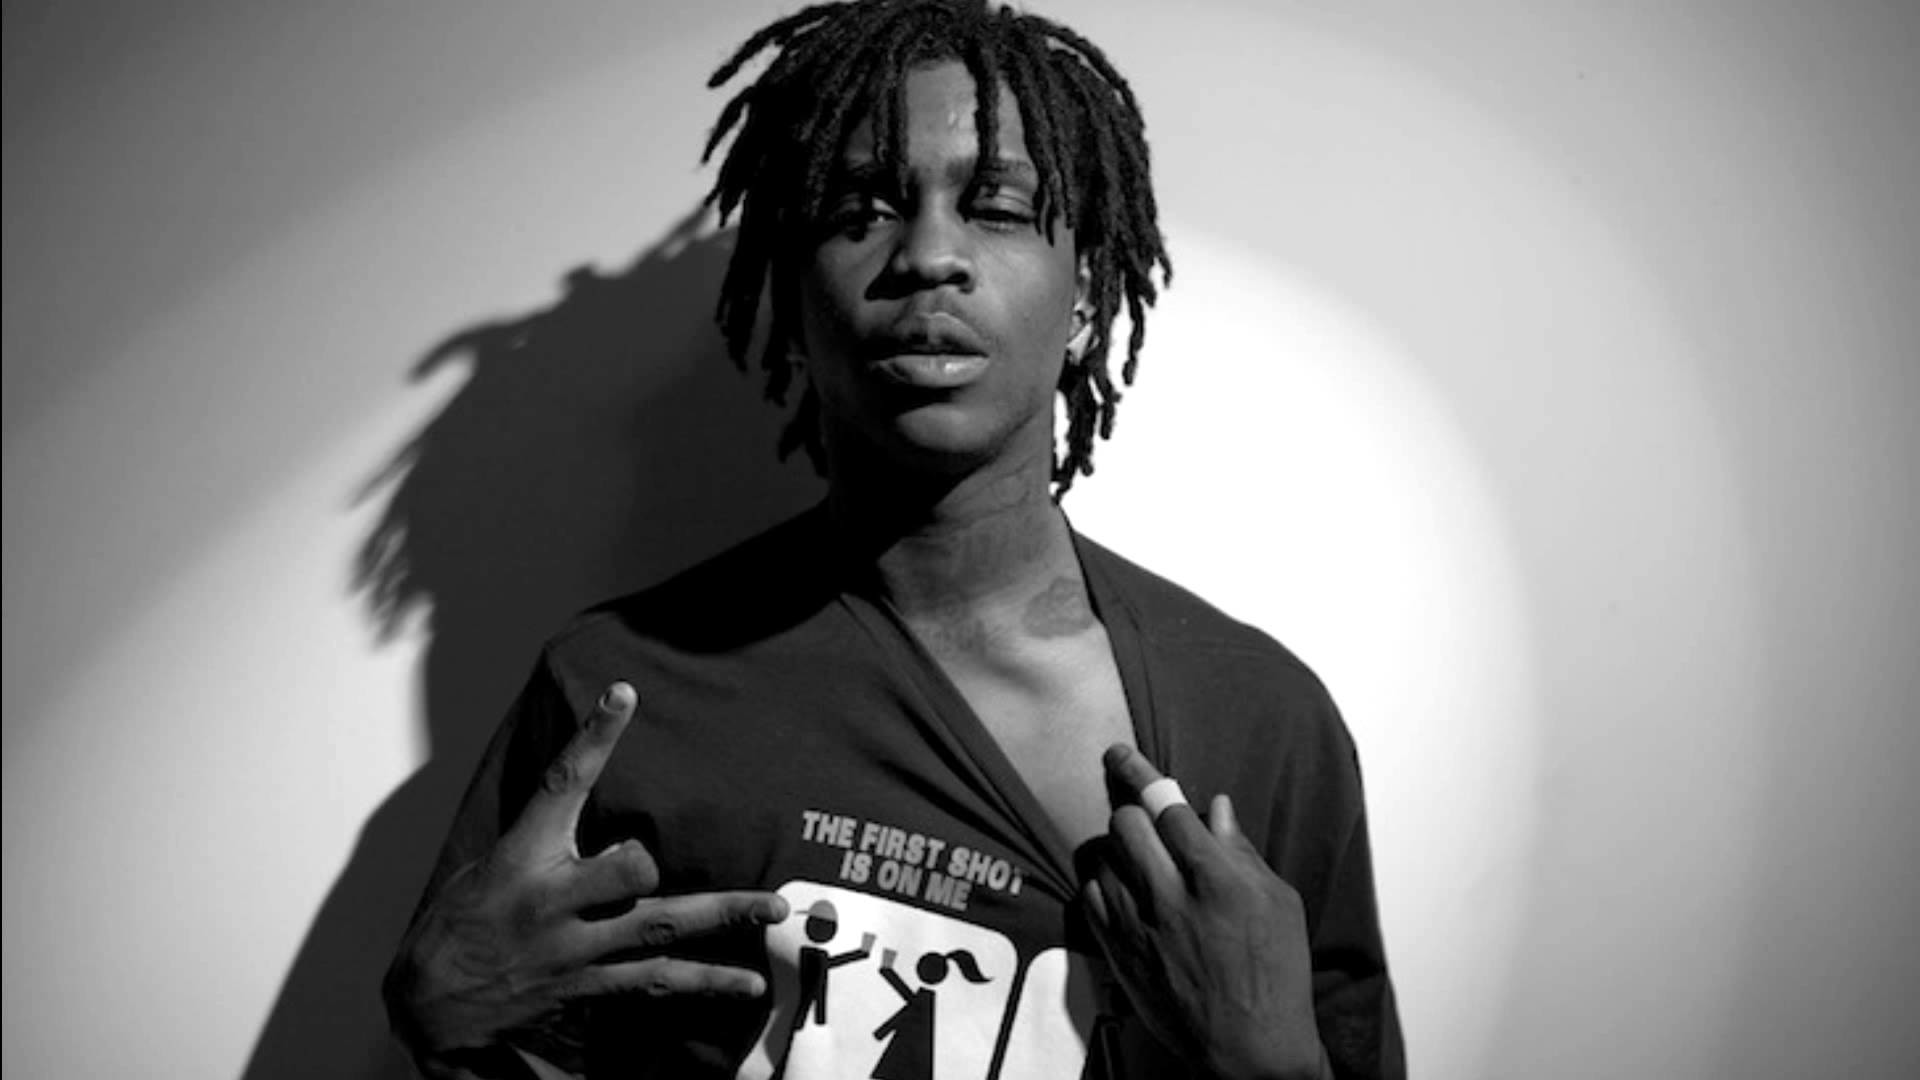 1920x1080 Chief Keef HD wallpapers Download Keith Cozart rapper